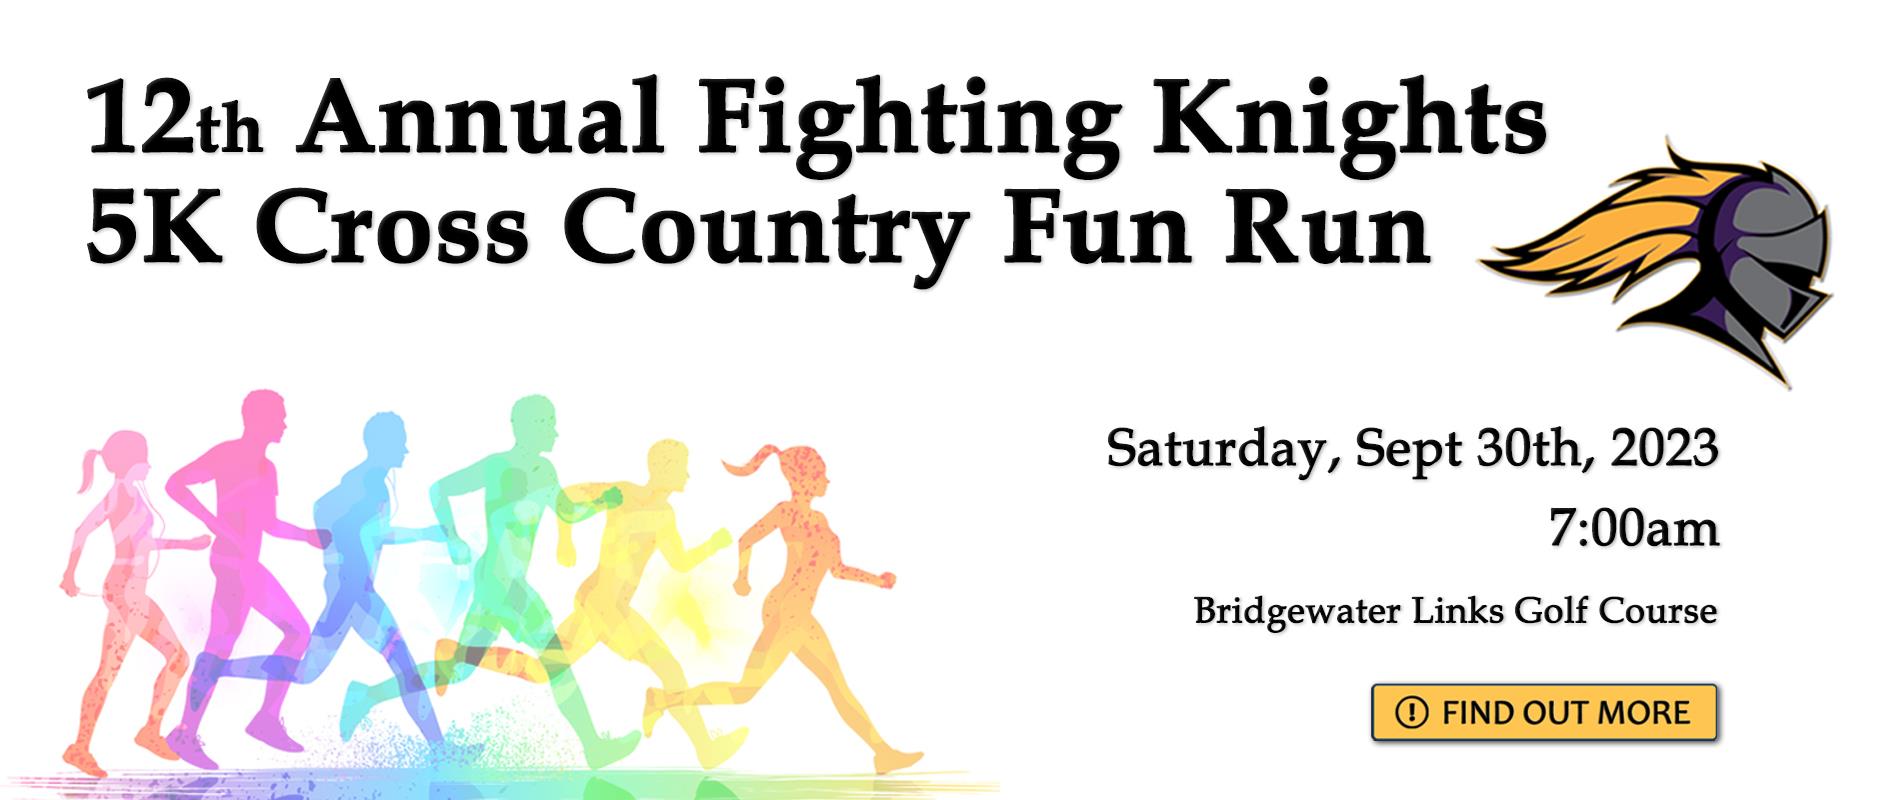 link to information and registration regarding the 12th Annual LHHS Cross Country Fun Run